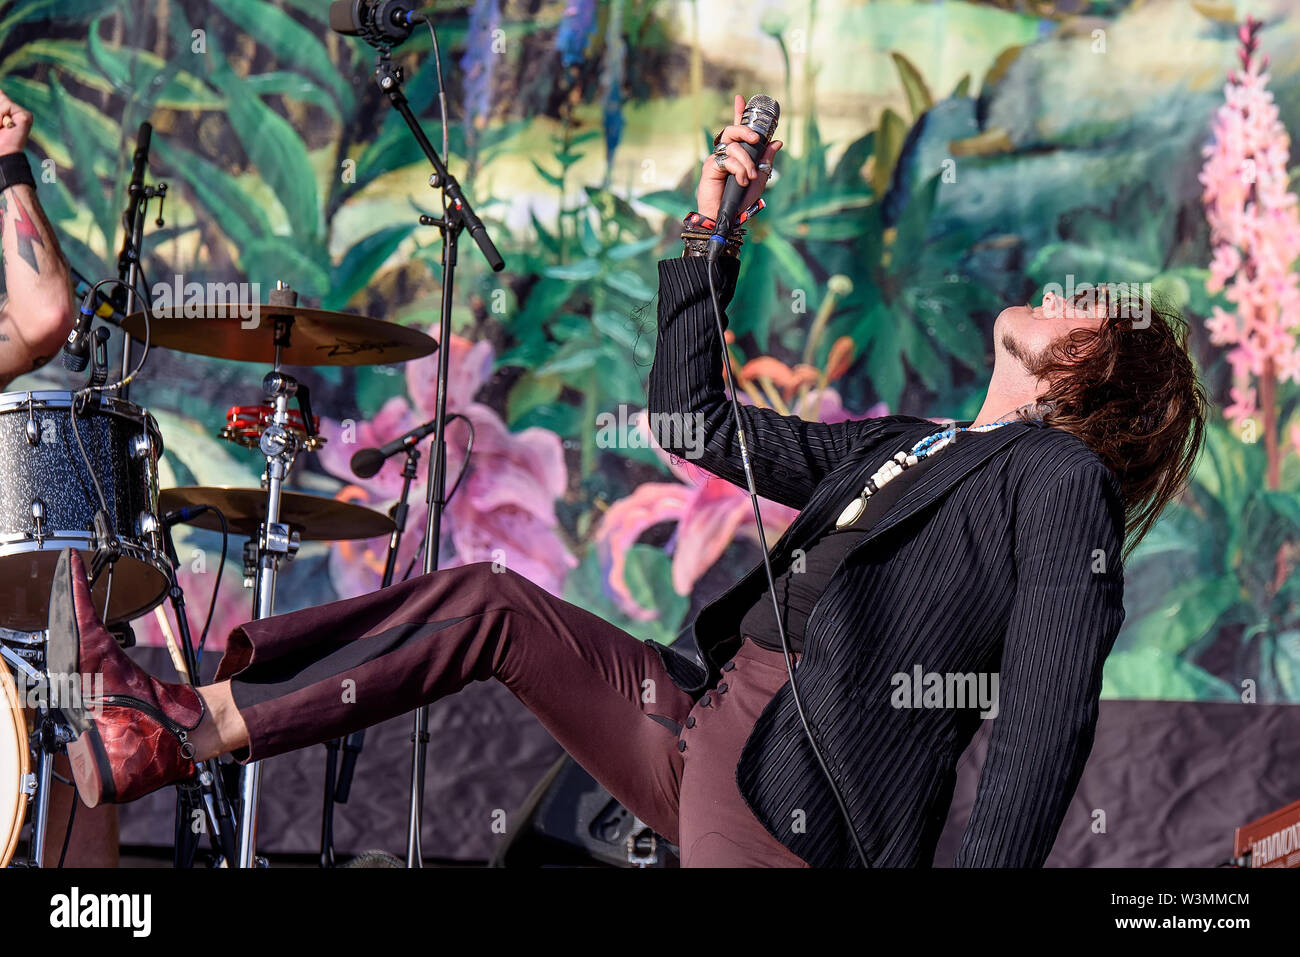 MADRID - JUN 29: Rival Sons (rock band) perform in concert at Download (heavy metal music festival) on June 29, 2019 in Madrid, Spain. Stock Photo